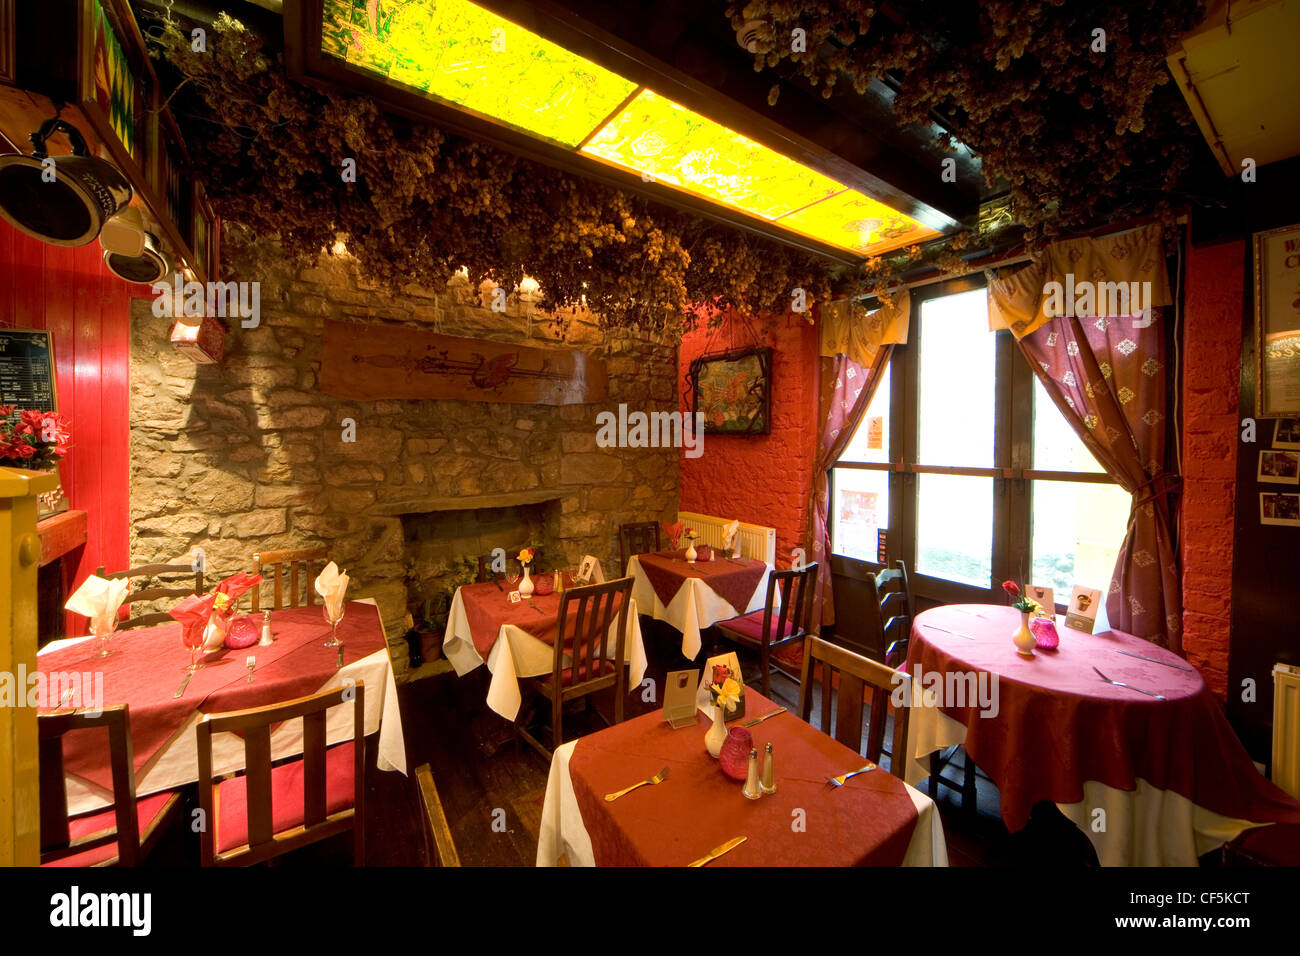 Internal view of the traditional Welsh  restaurant Bwyty Ogof Y Ddraig. The restaurant has a Welsh theme and has Celtic decor th Stock Photo